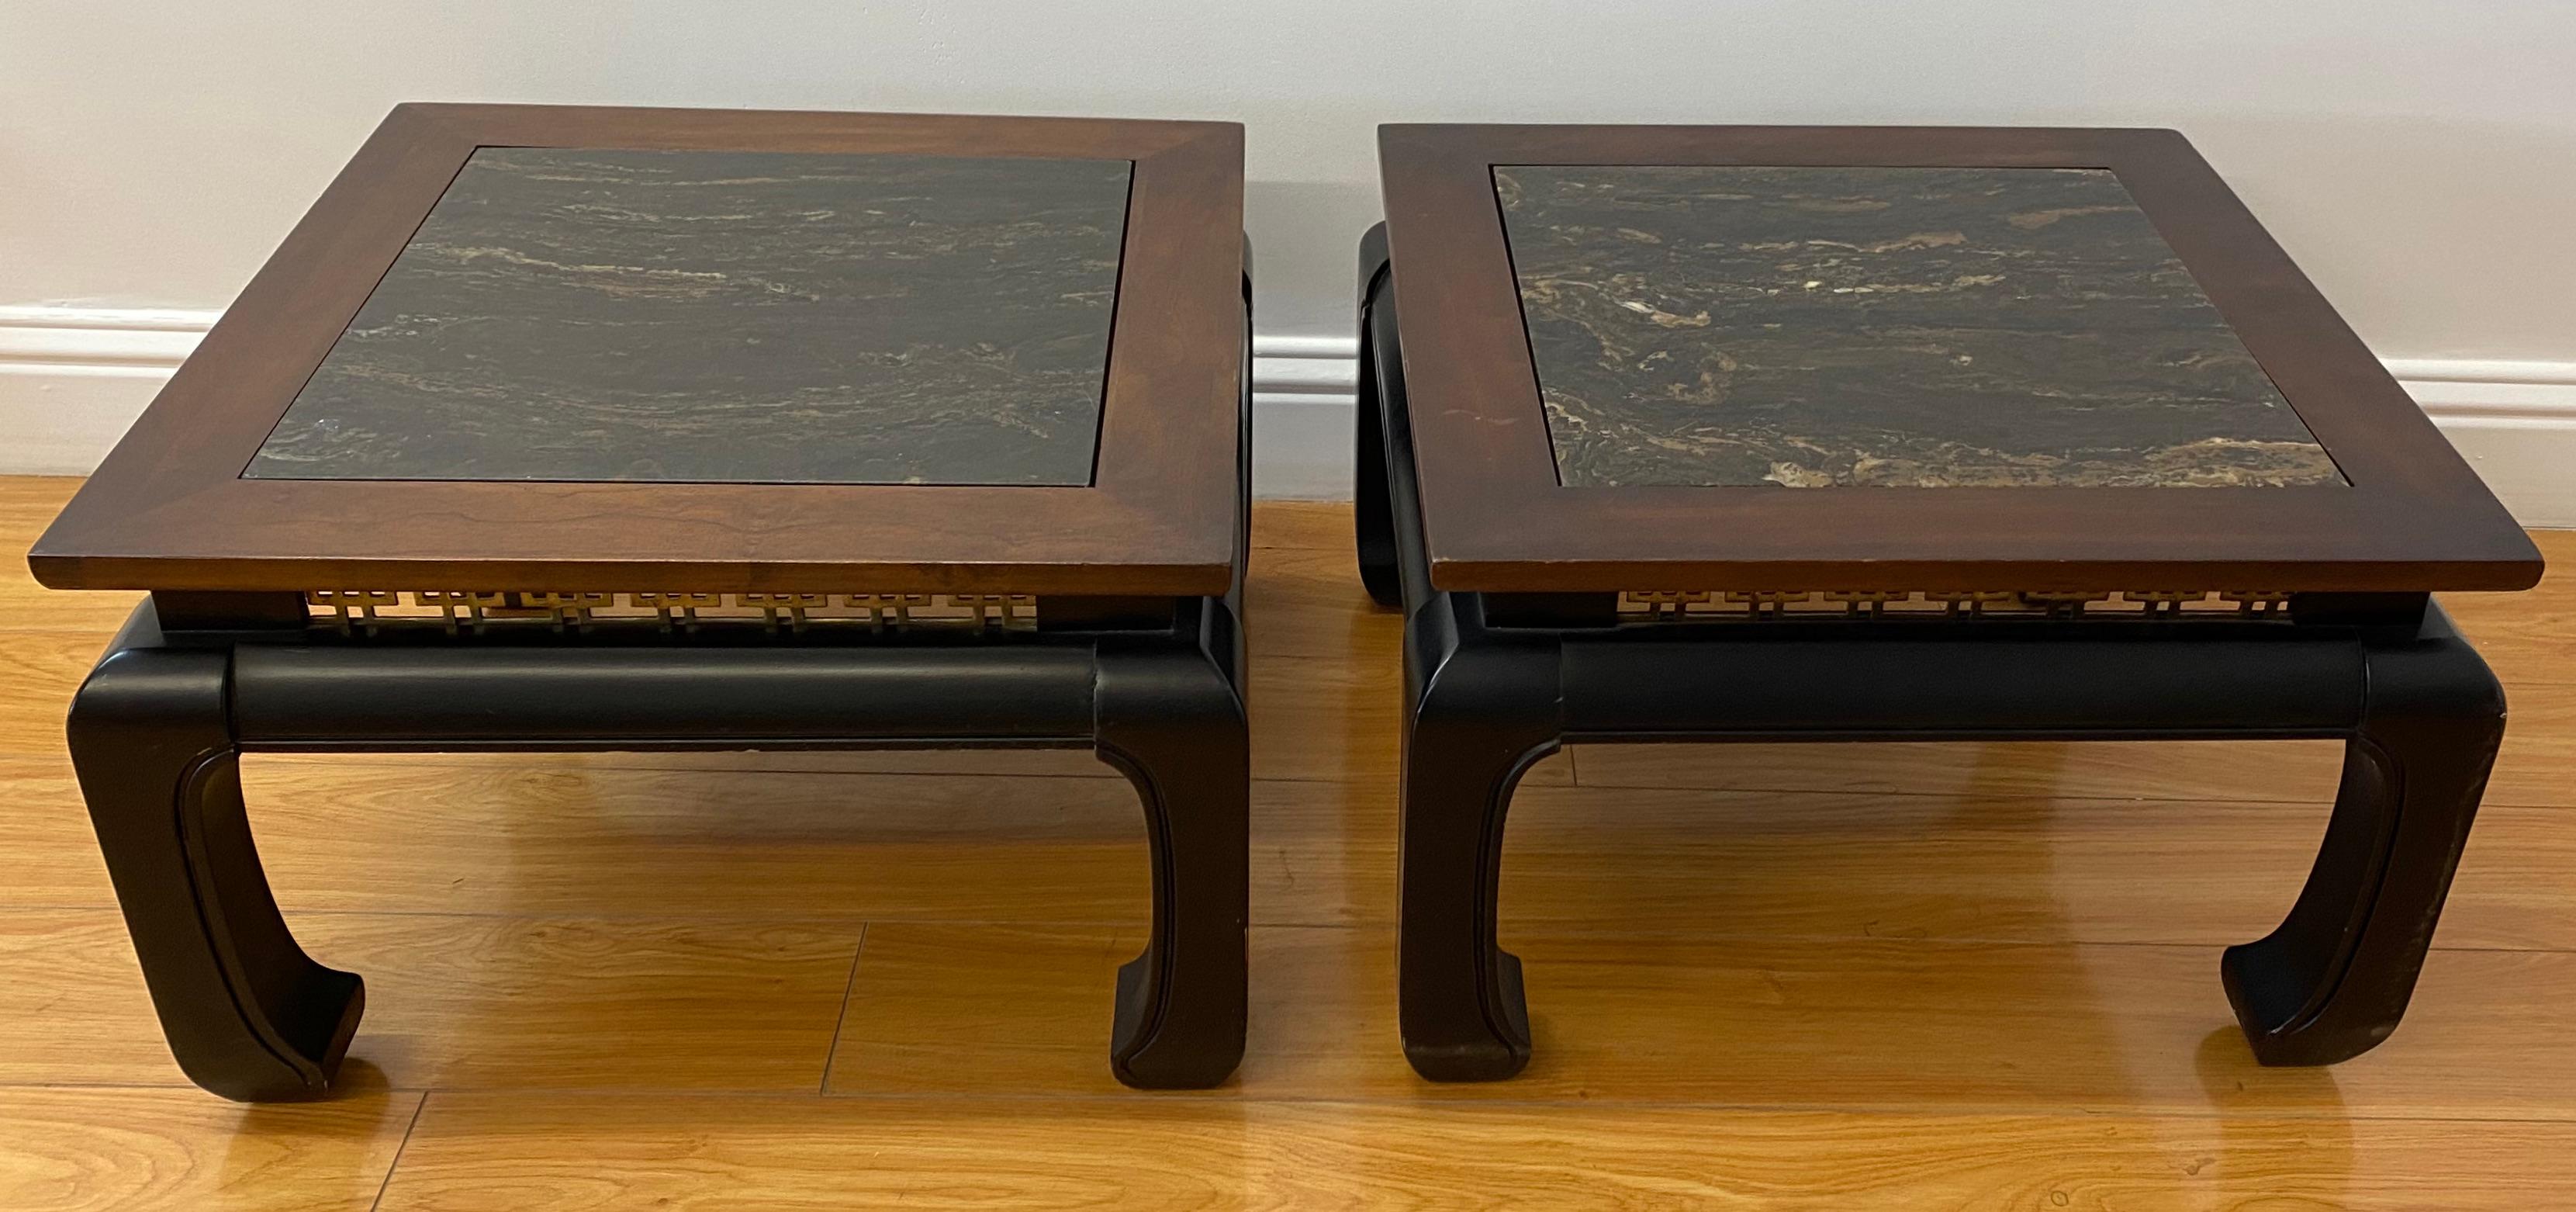 Pair of contemporary walnut, marble & brass side tables

Gorgeous pair of Asian walnut, marble and brass side tables

Each table has an insert marble top and the base is surrounded with brass (see pics)

Each table measures 21.5